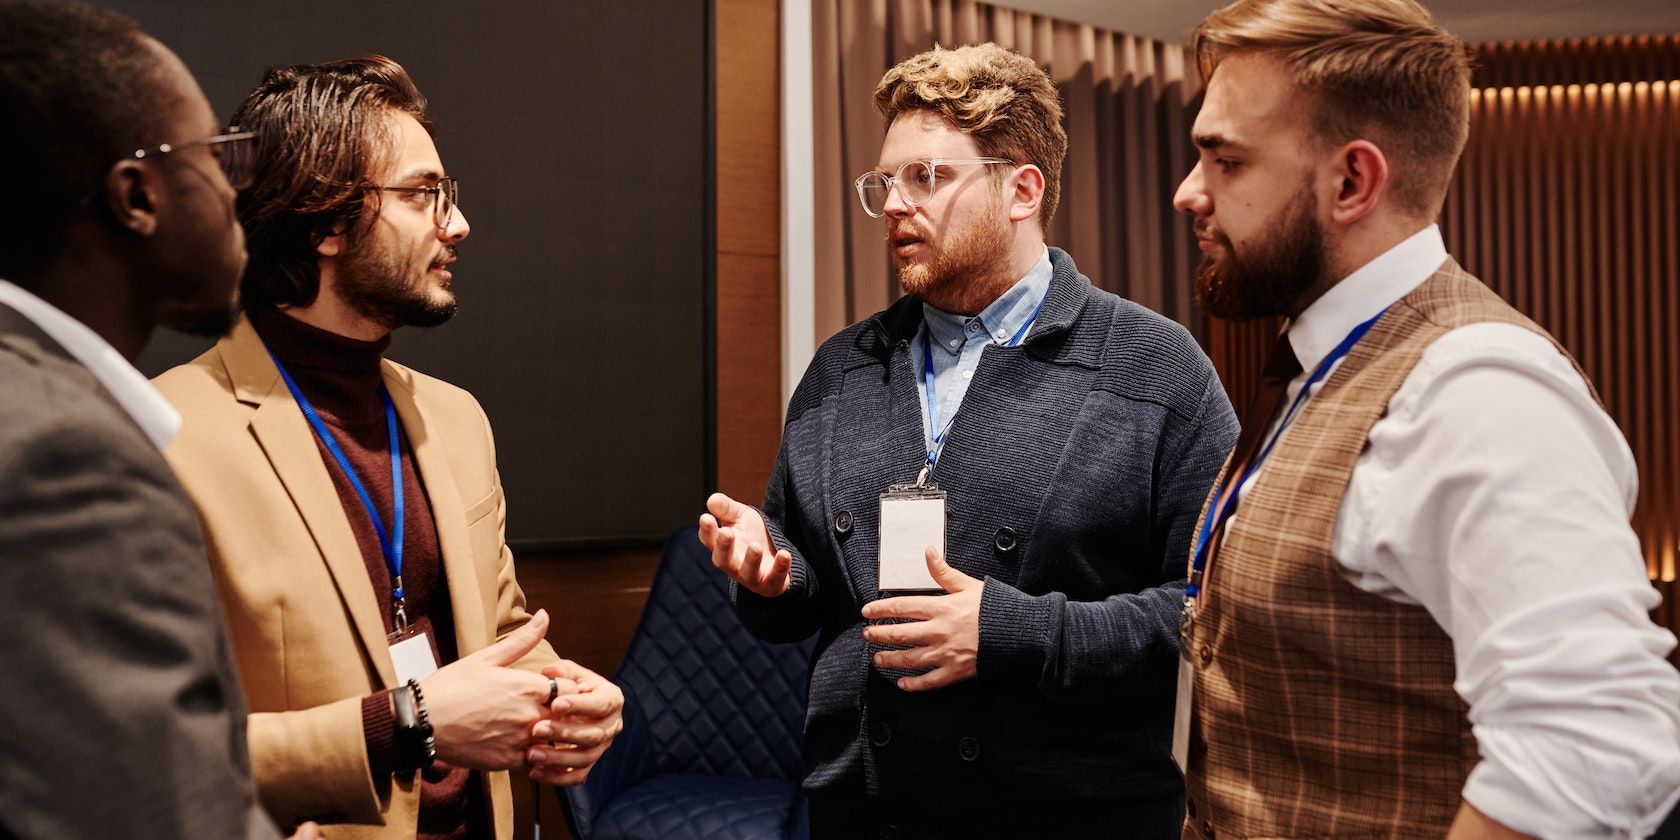 Men in Discussion at an Event